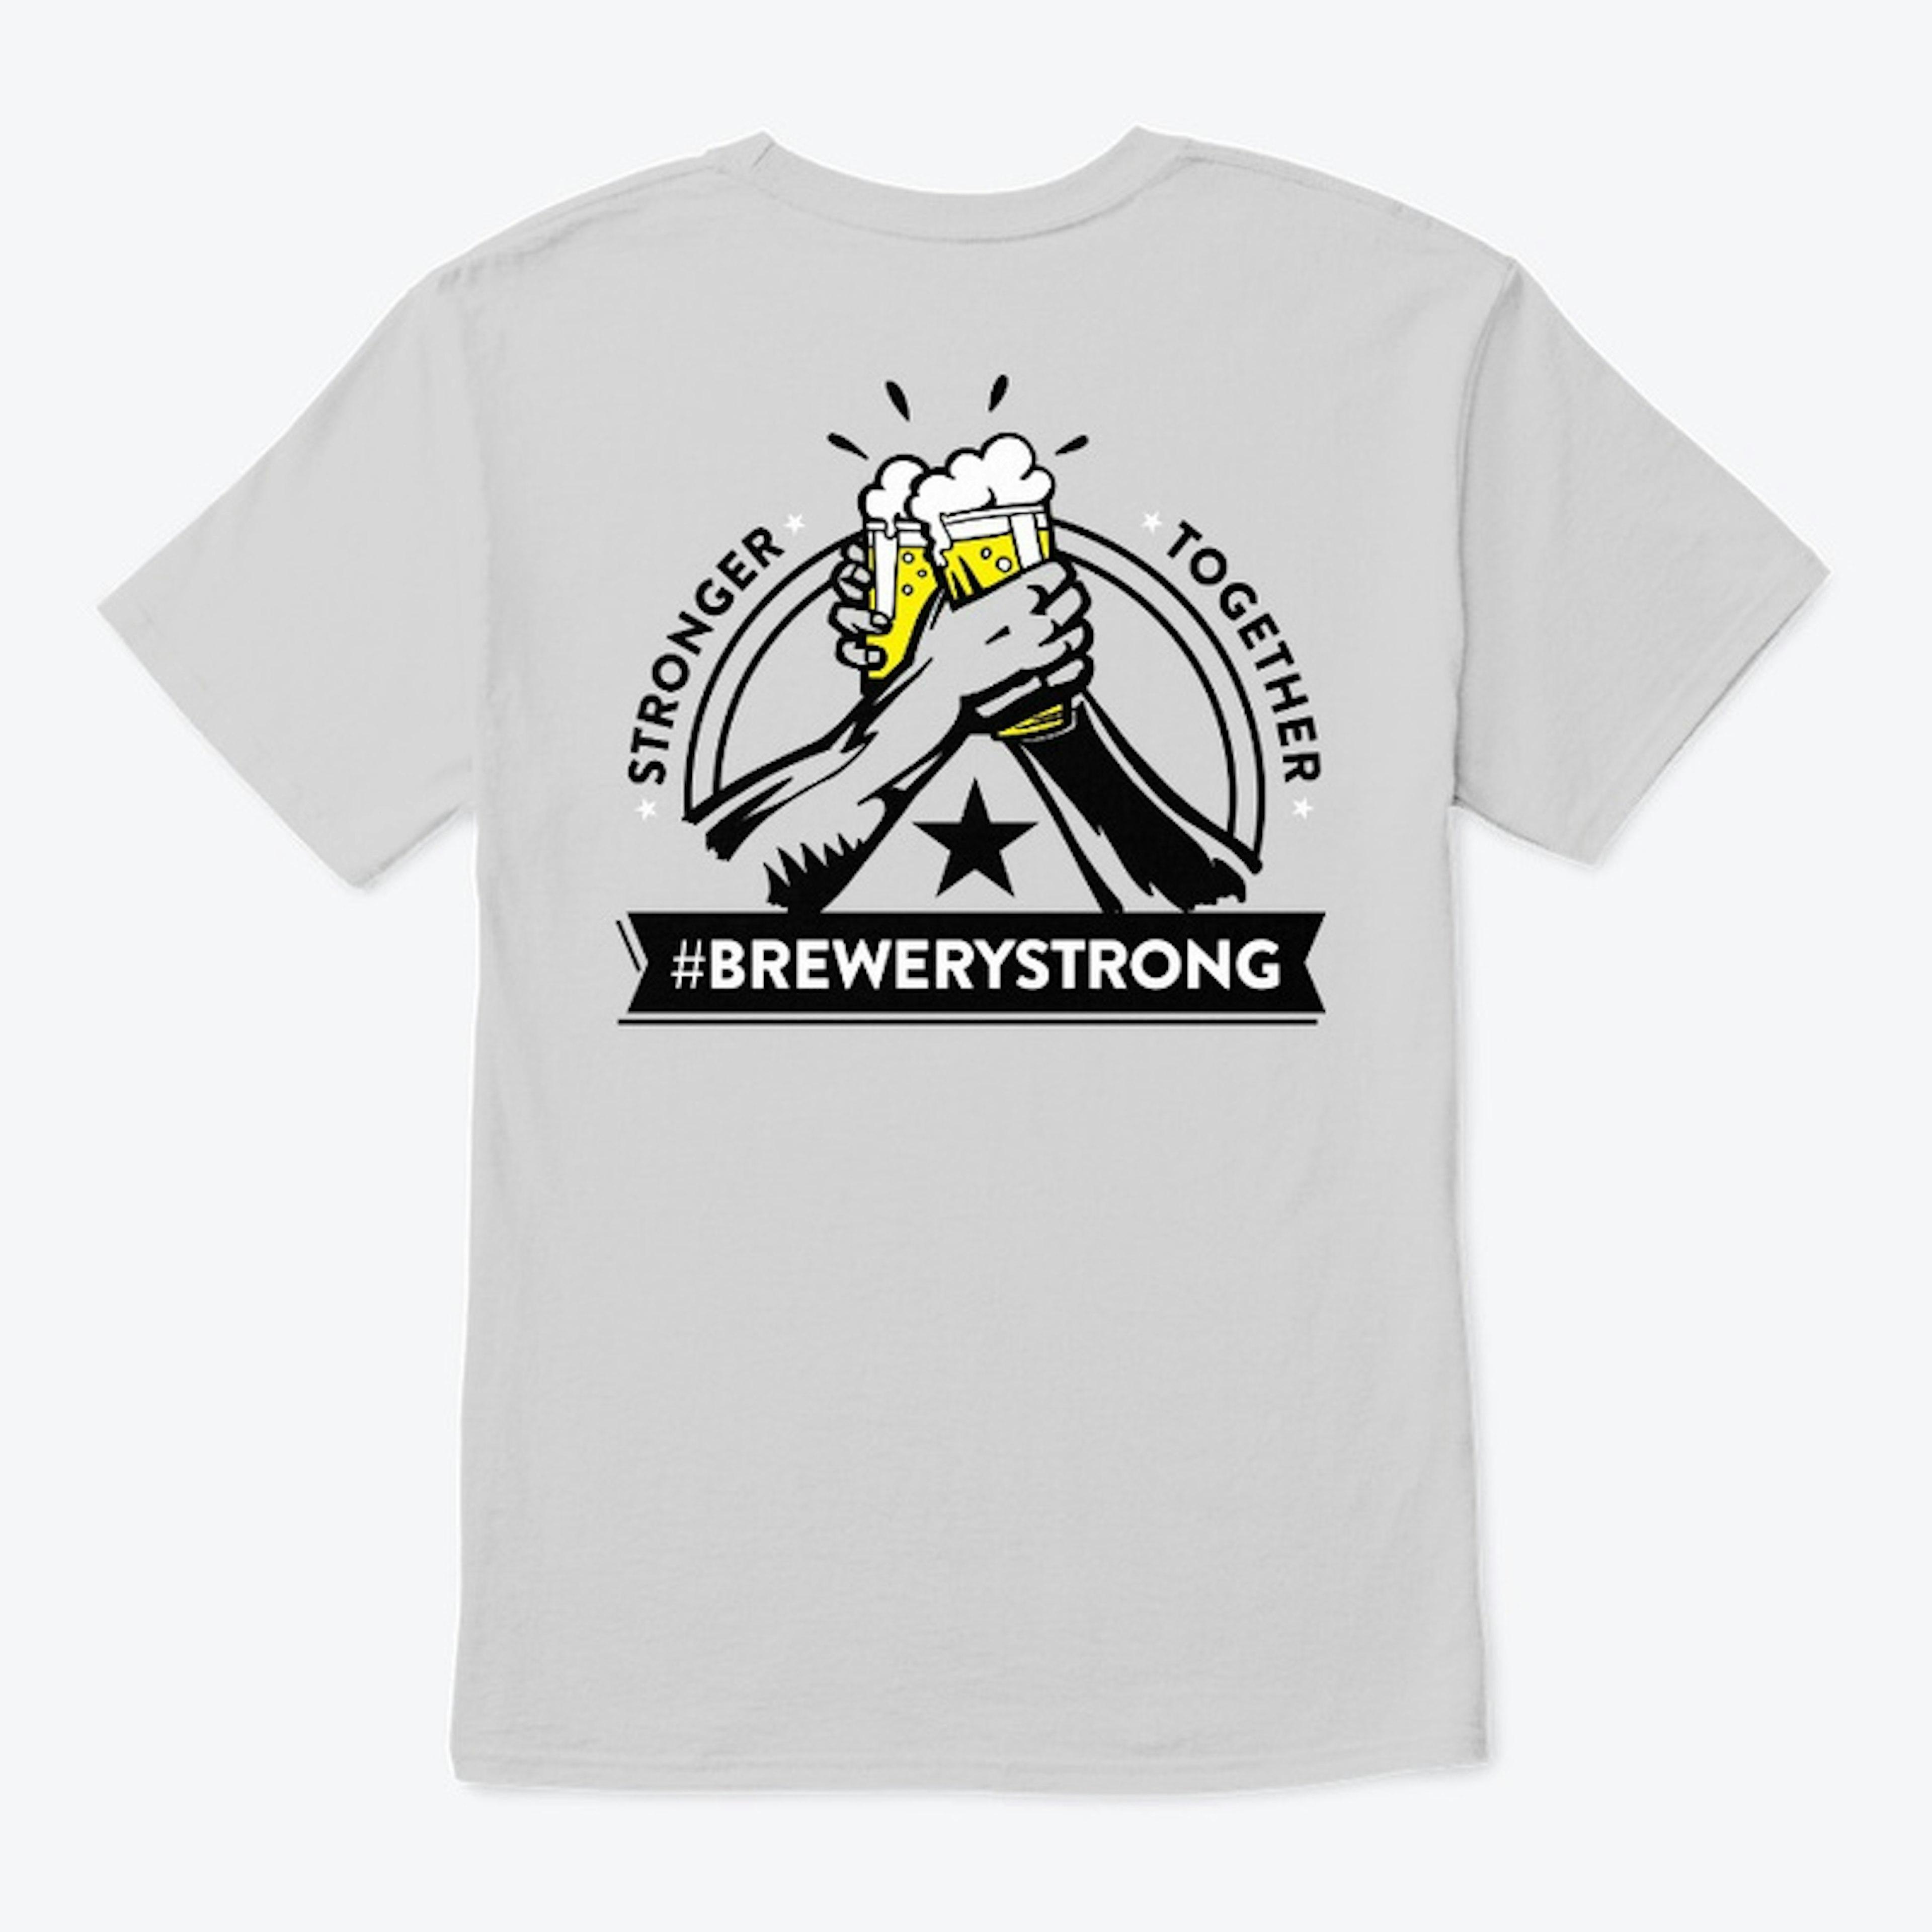 Brewery Strong!